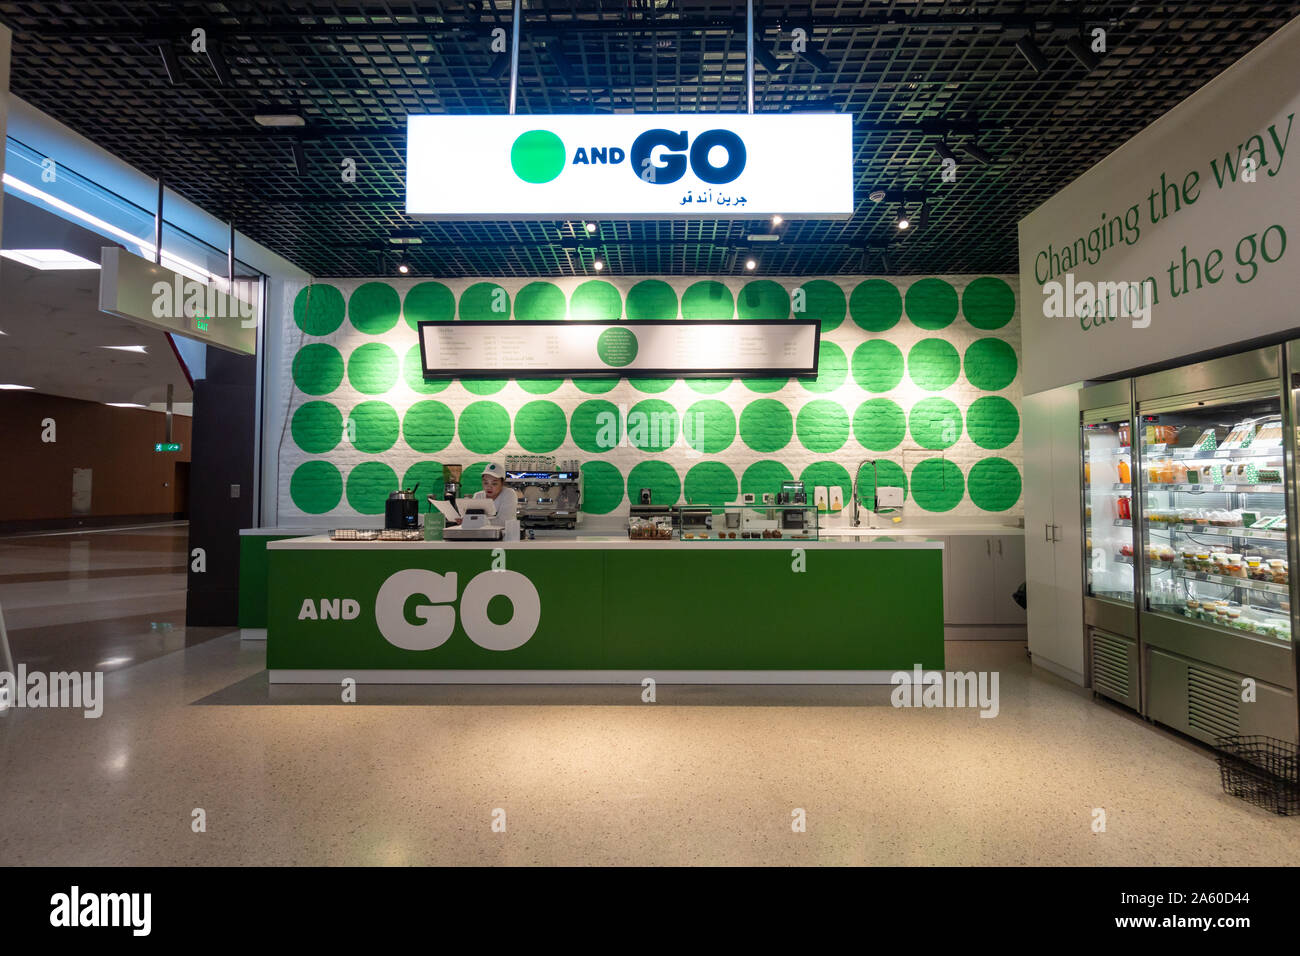 'Green and Go' - a takeaway style deli in an underground metro station in Doha, Qatar, selling prepared meals, sandwiches and other snacks Stock Photo